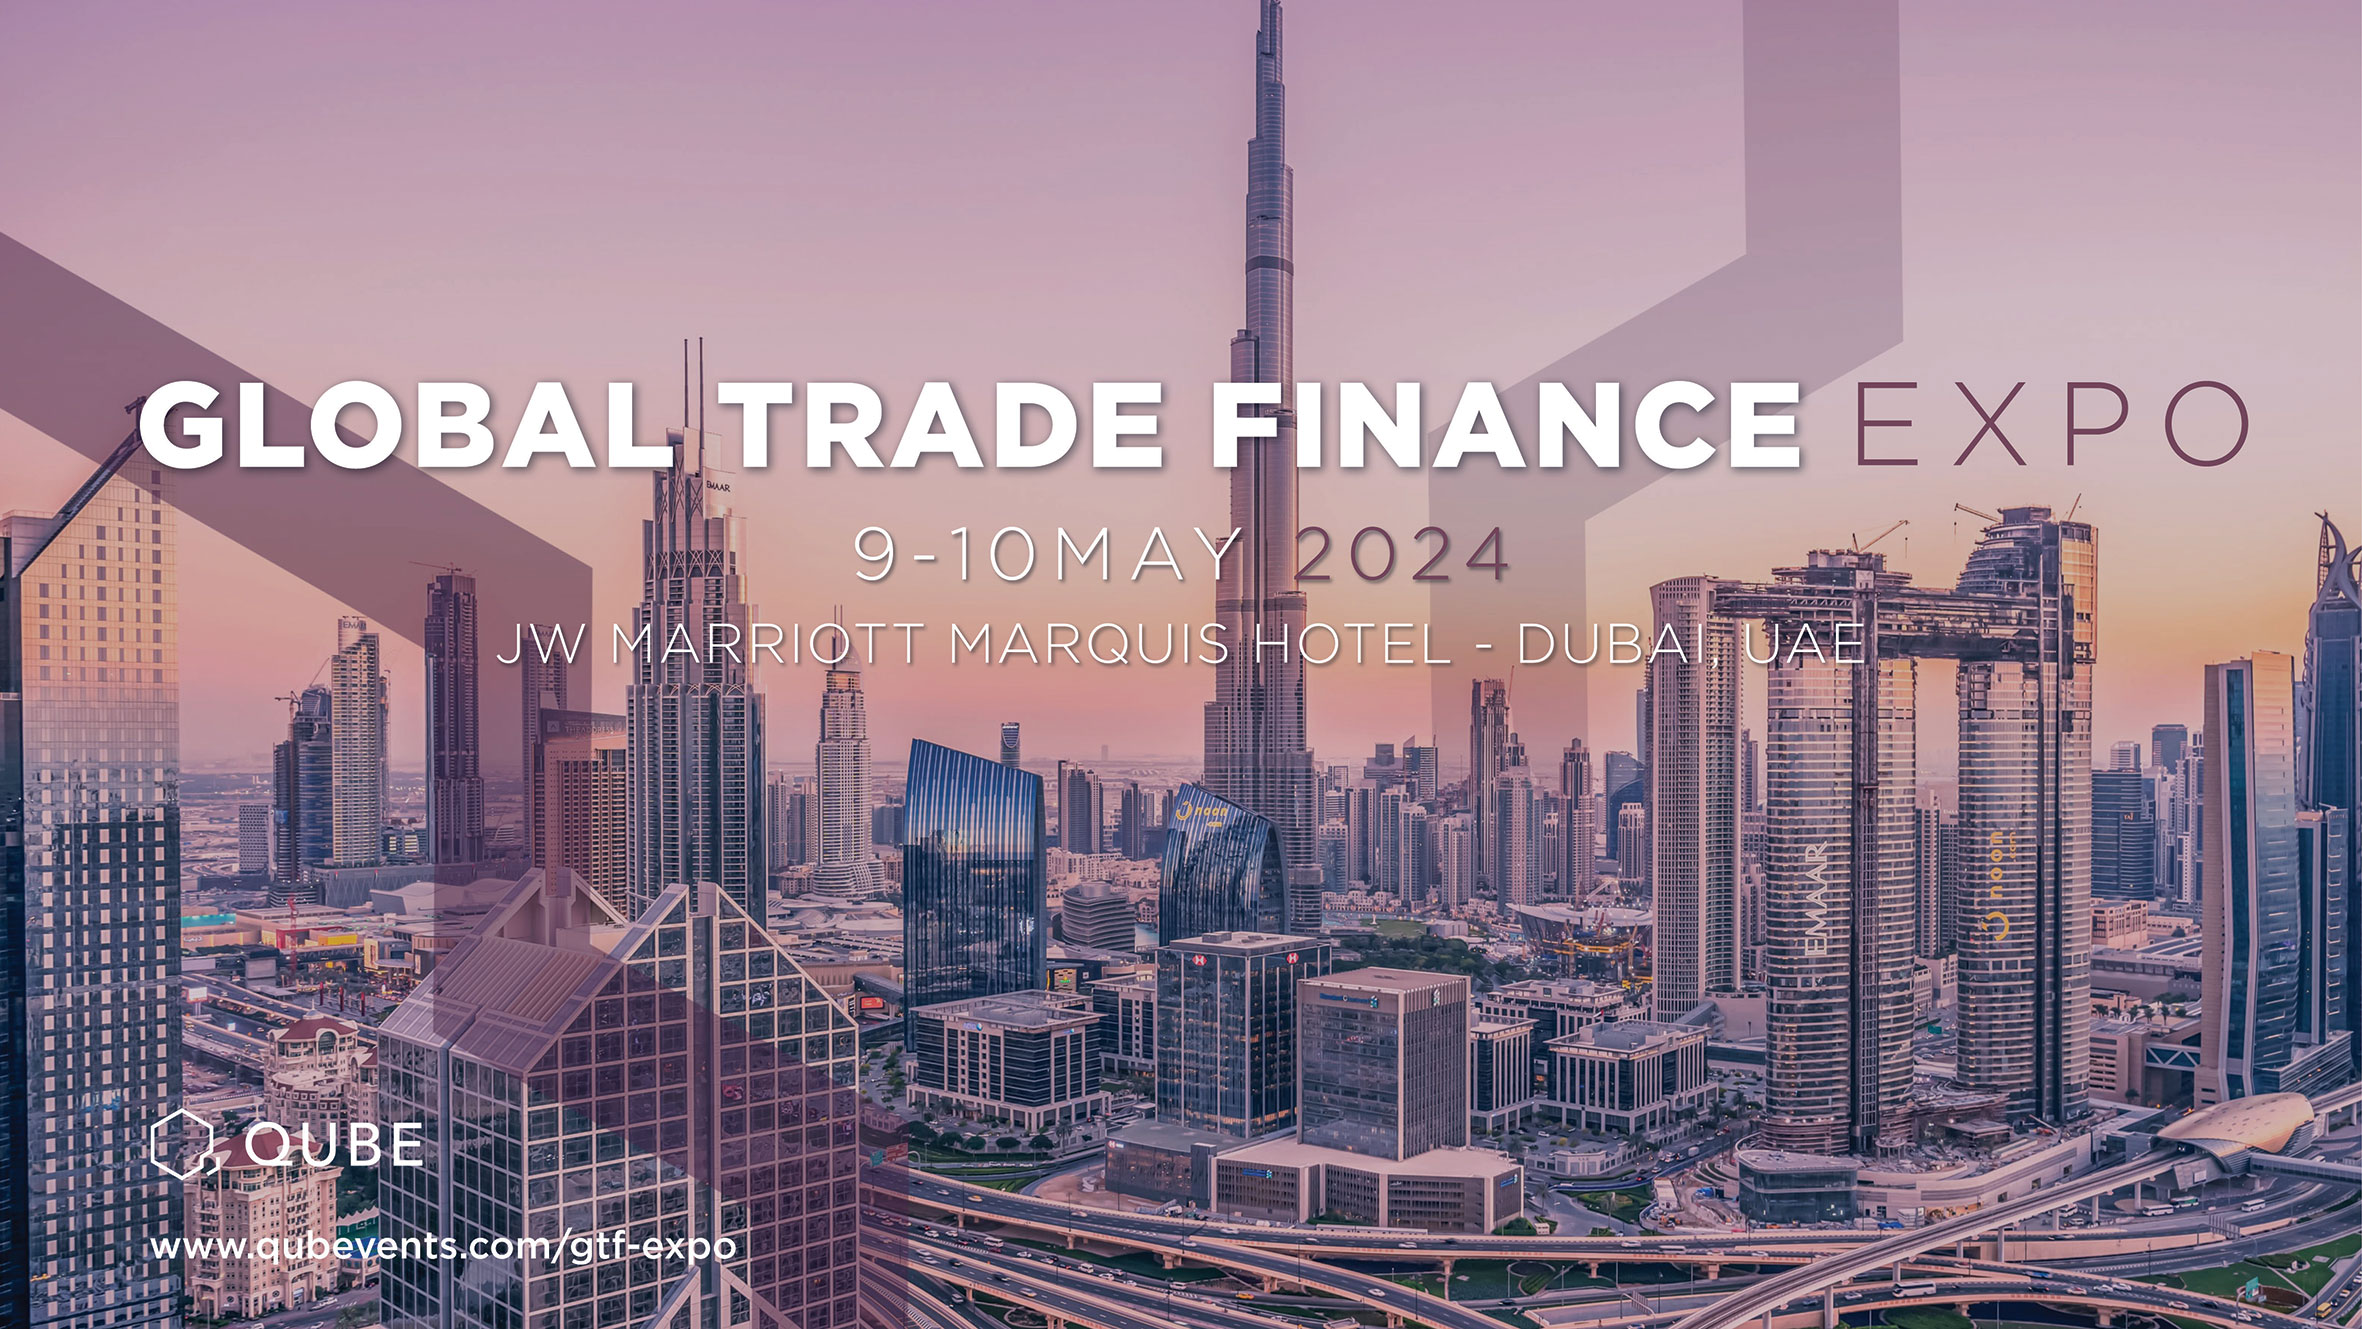 The Global Trade Finance Expo, Business Bay - Dubai - United Arab Emirates, Dubai, United Arab Emirates